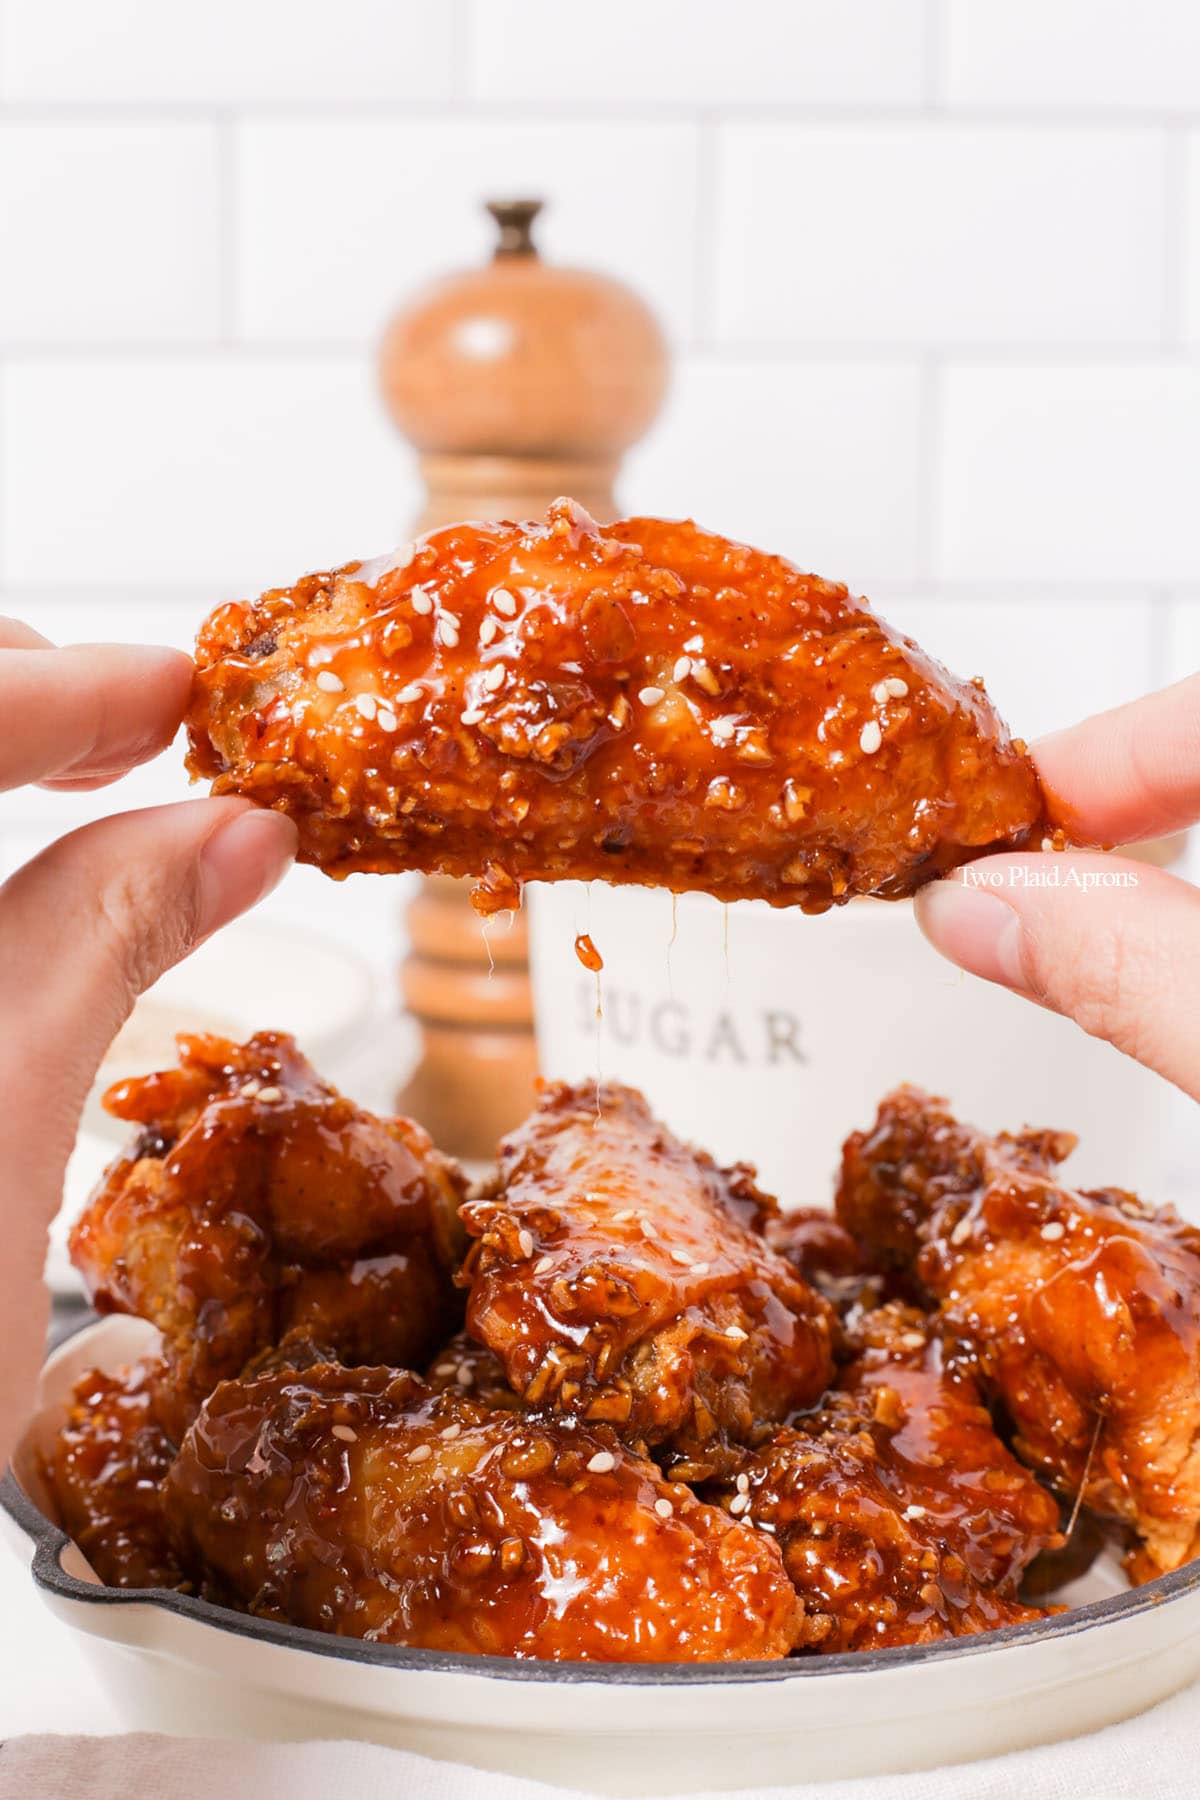 Holding Korean fried chicken with soy garlic sauce.